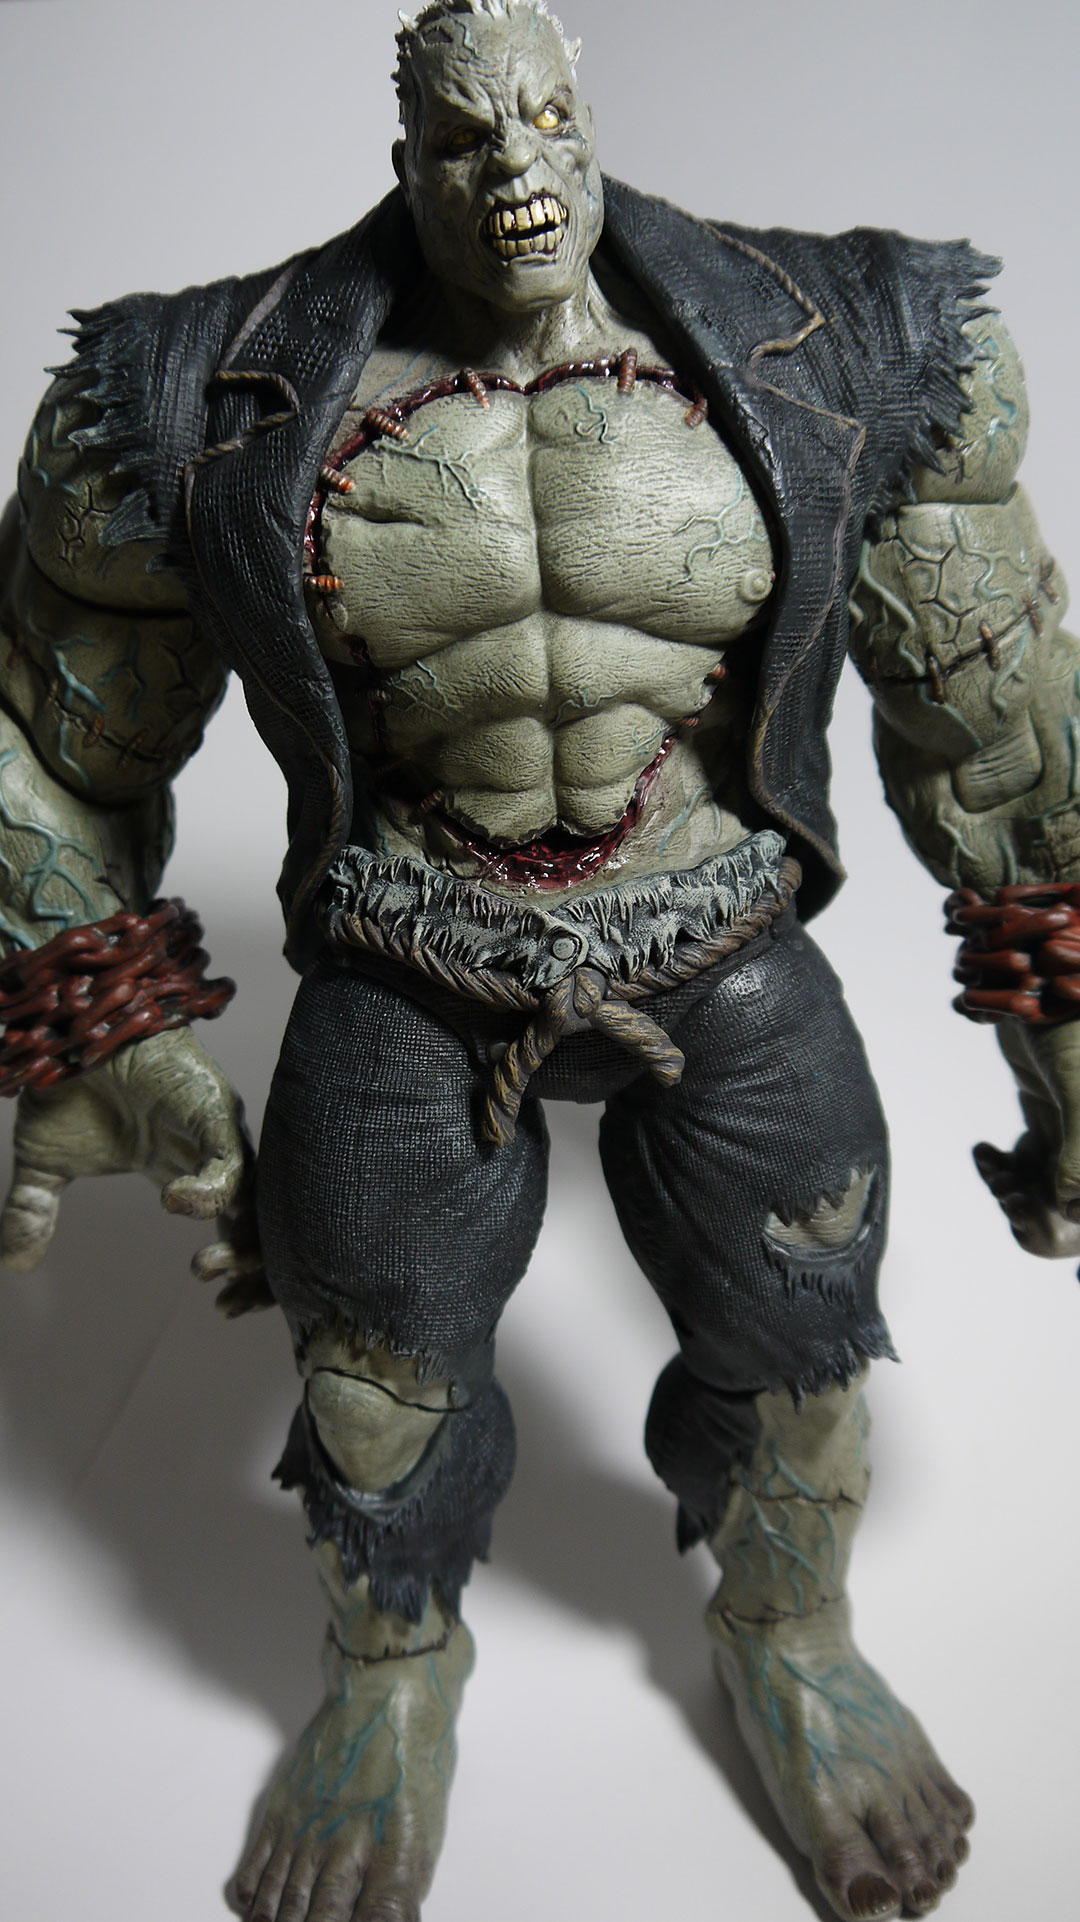 Holy Walking Dead, Batman! That’s One Massively Ugly Action Figure